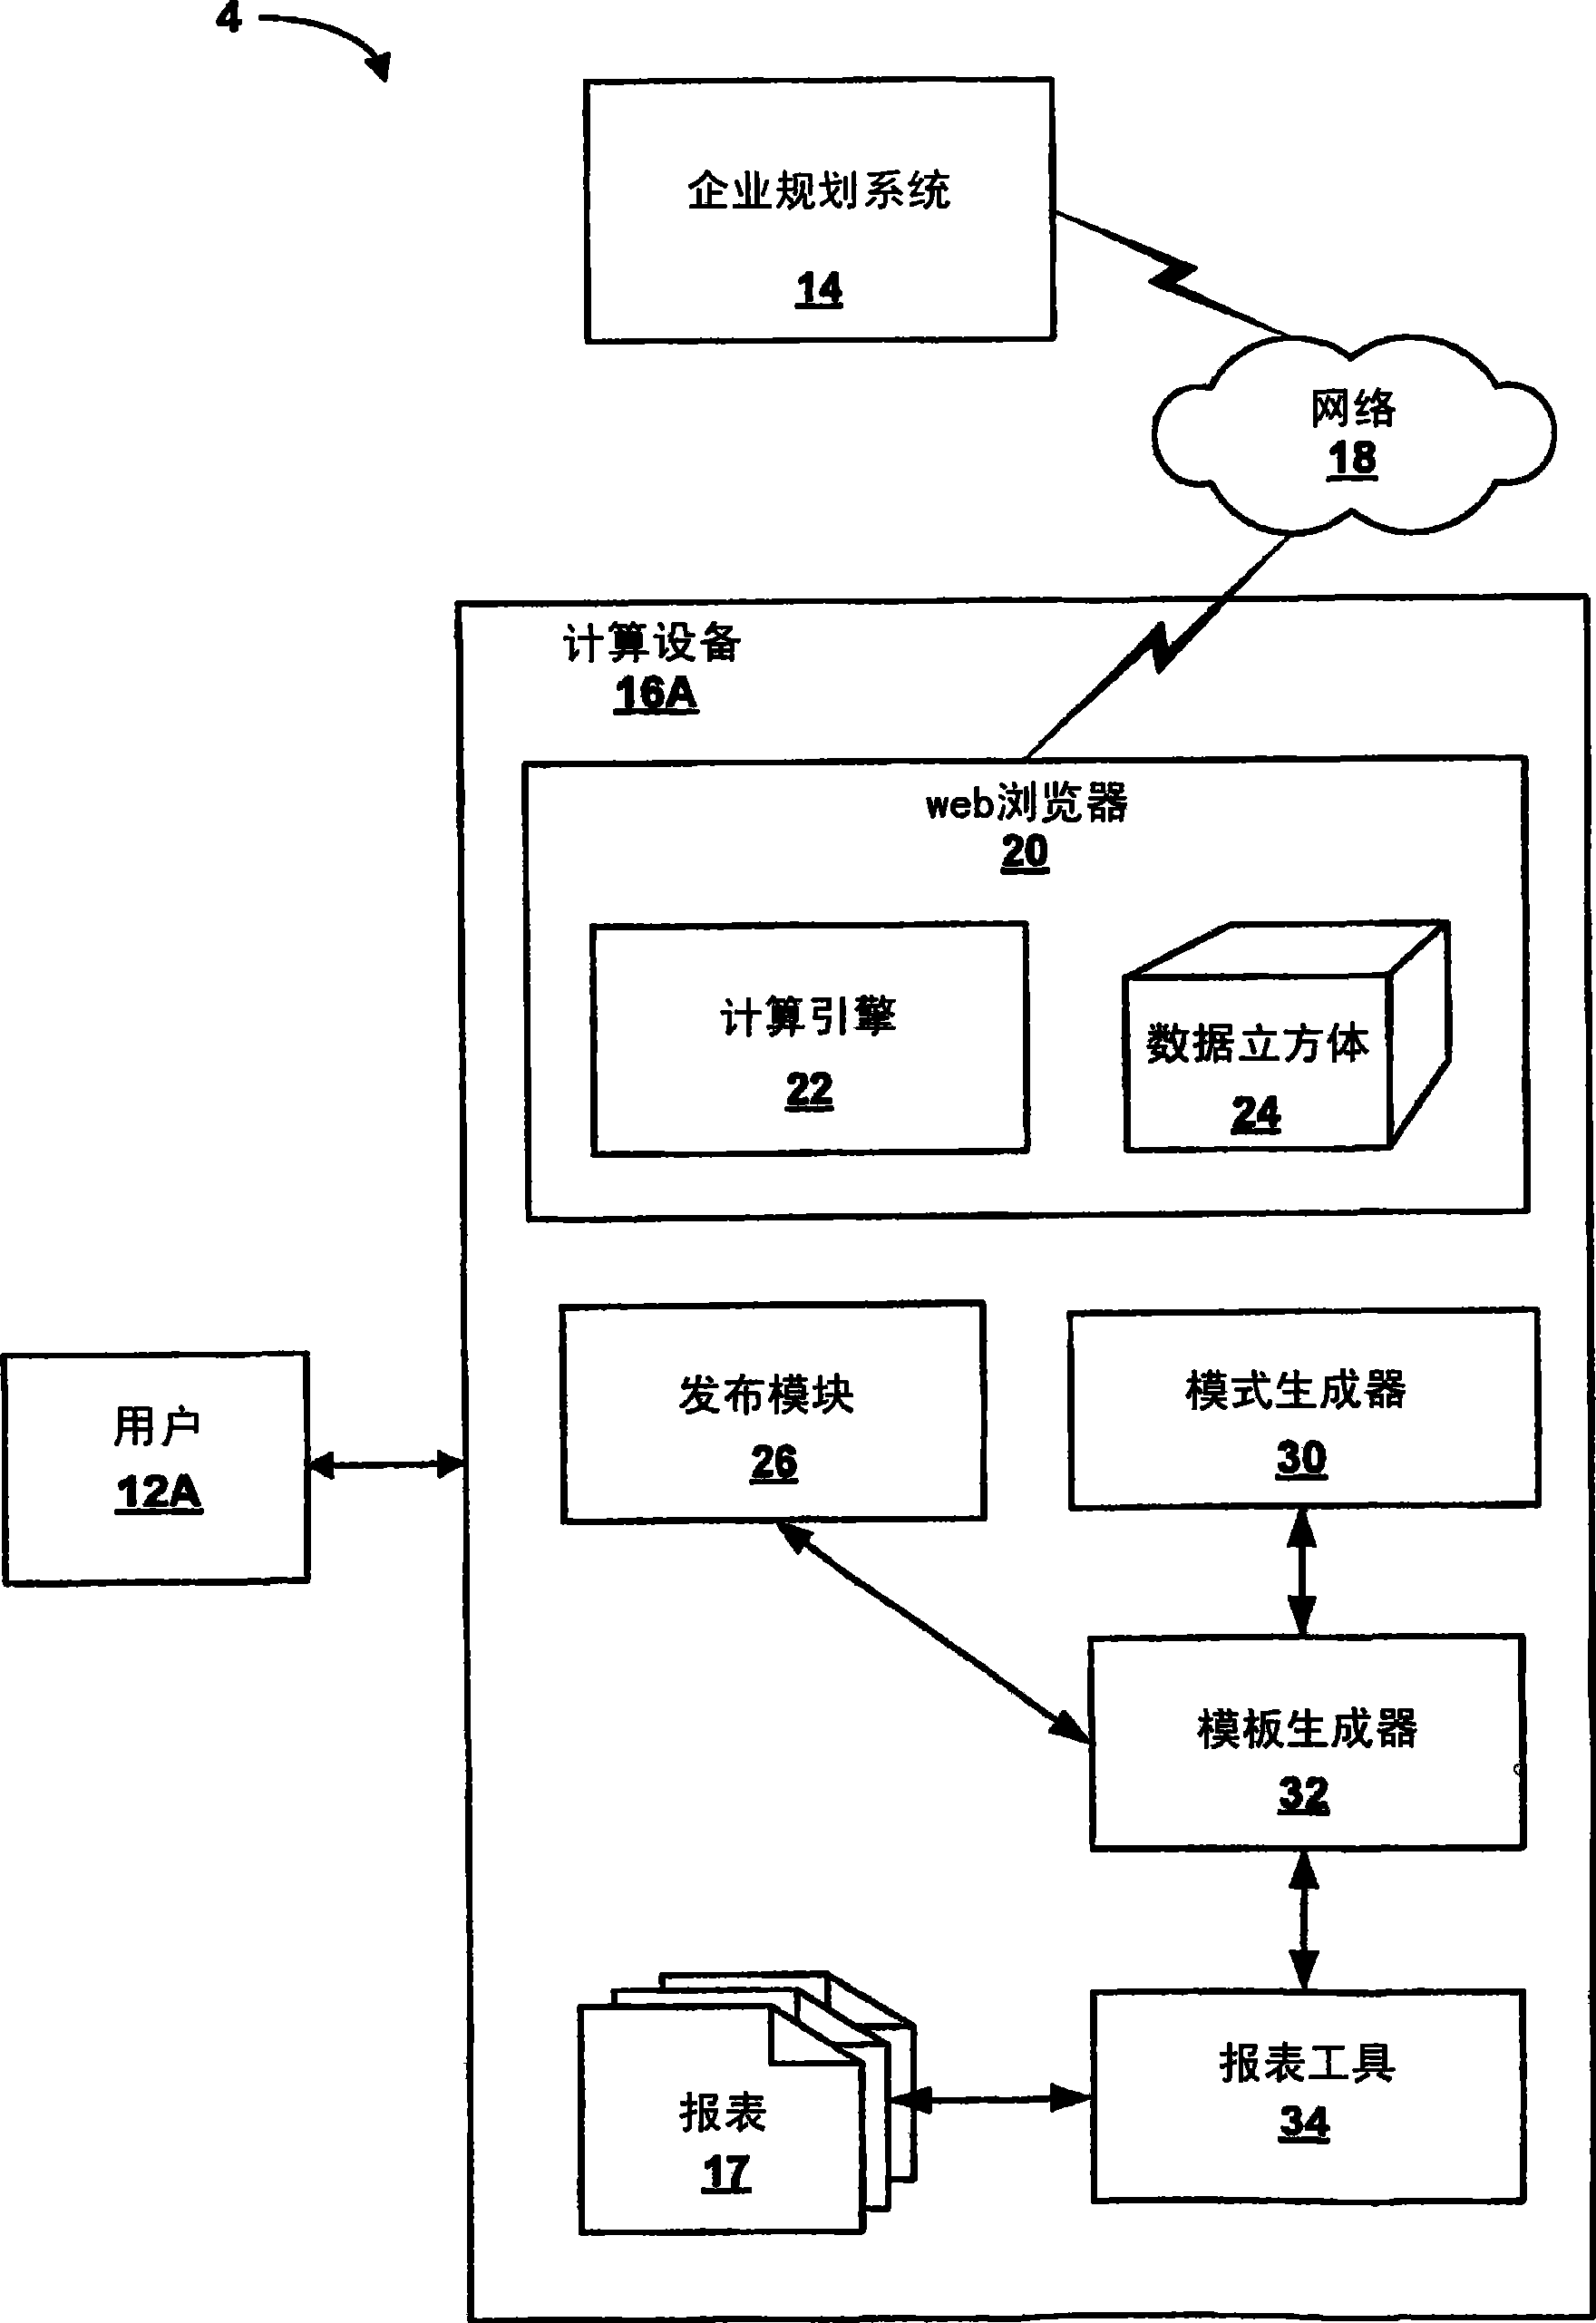 Automated relational schema generation within a multidimensional enterprise software system